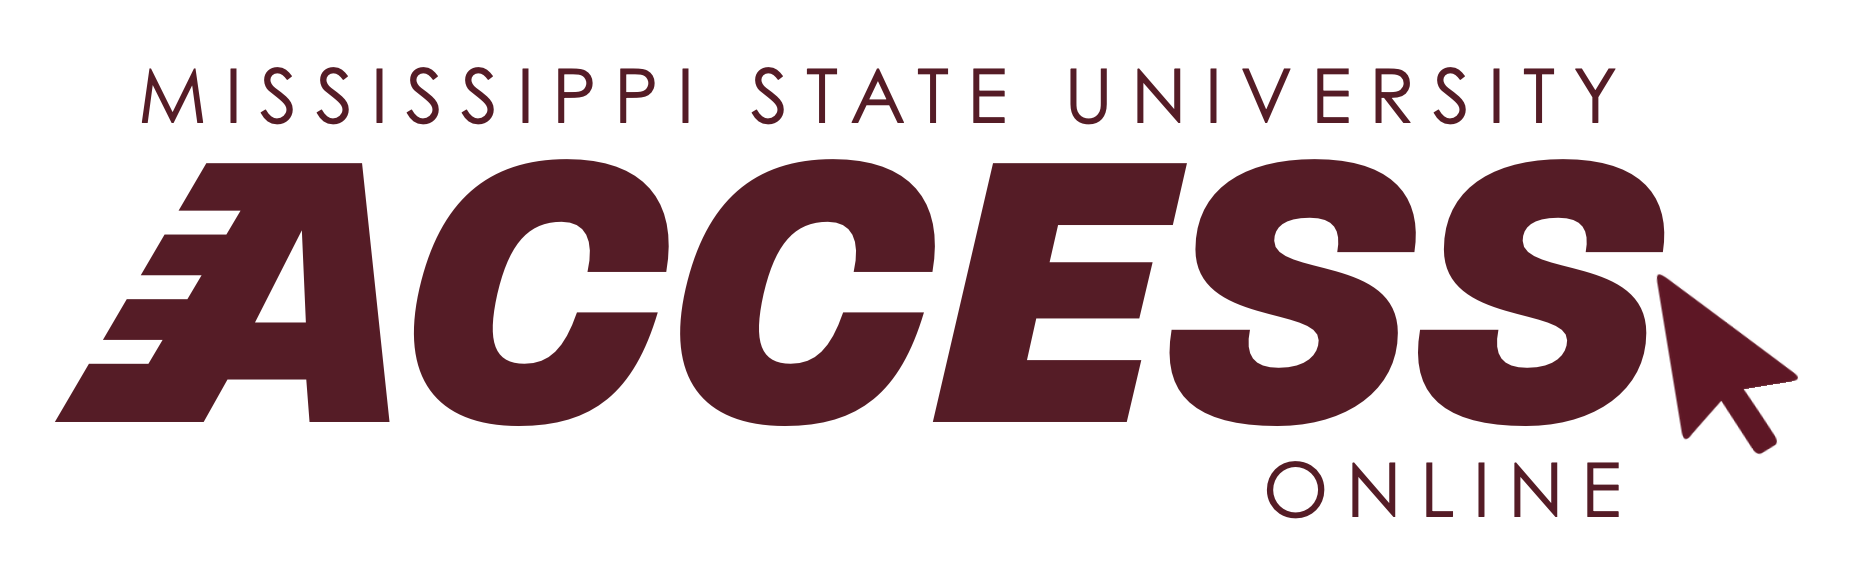 Image is a logo that says Mississippi State University ACCESS Online